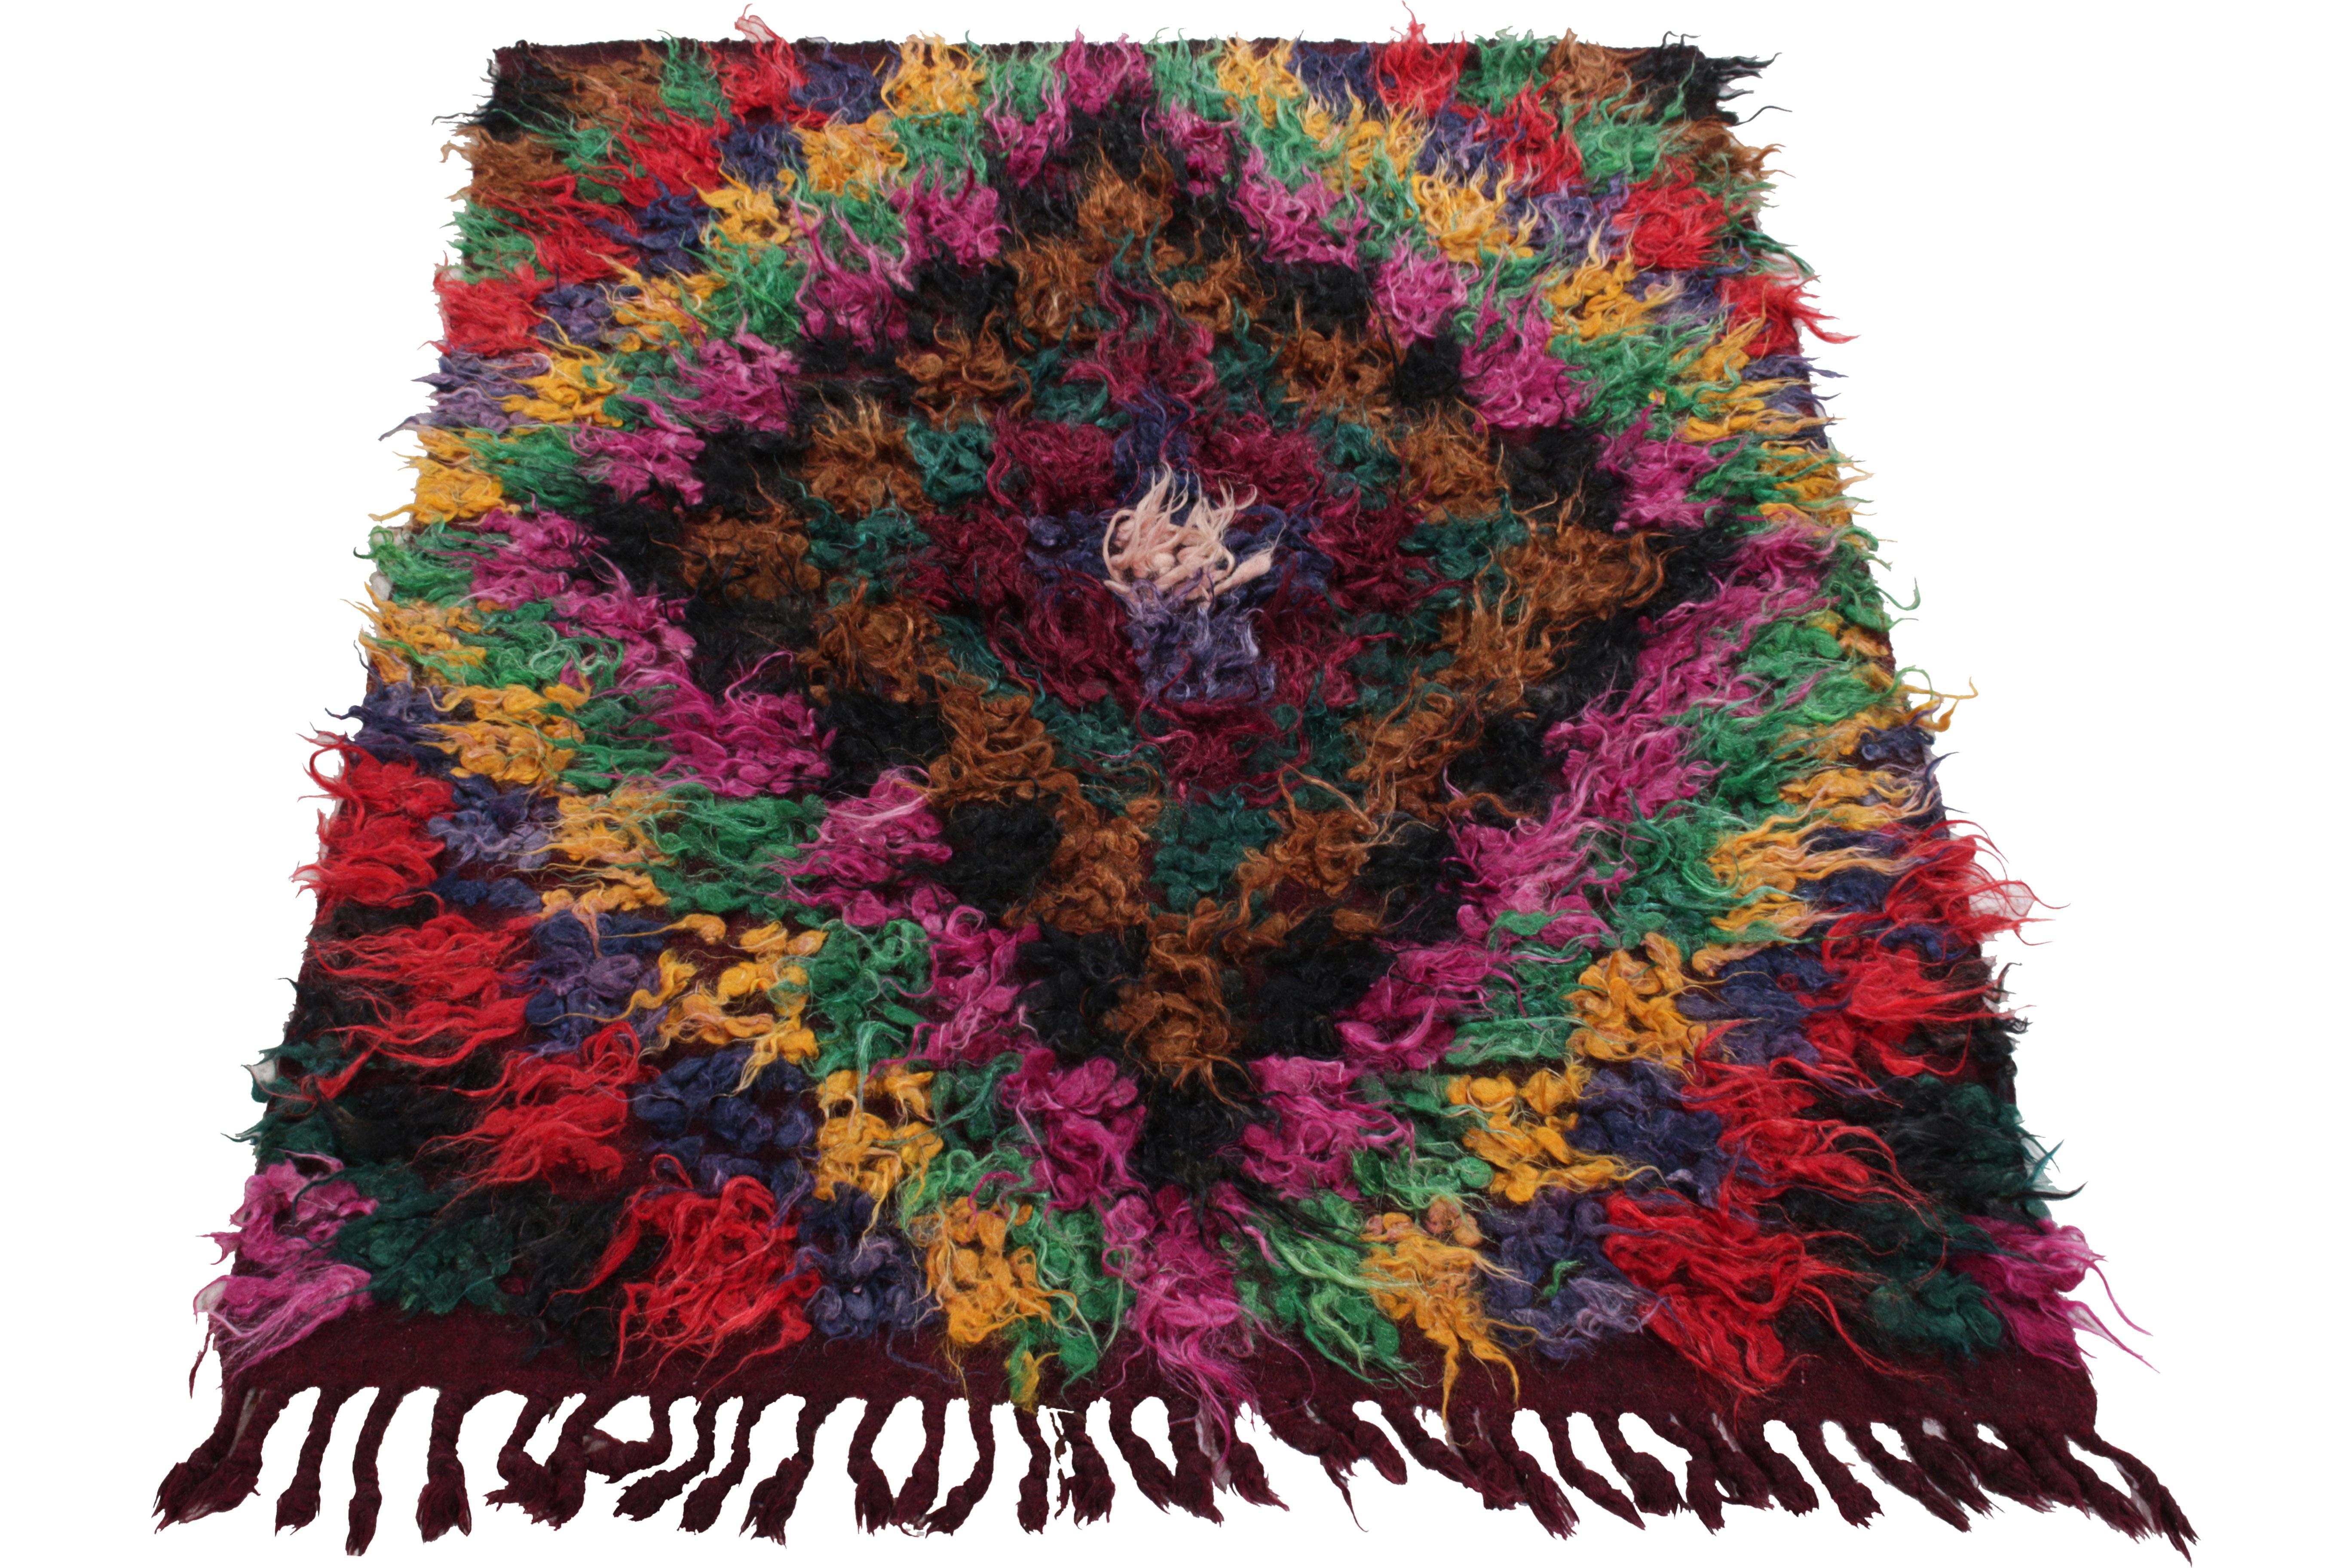 Coming from Turkey circa 1950-1960, this 4x5 vintage shag rug enjoys a resplendent high pile in magenta, forest green, golden, ink blue, red, back & chocolate brown - all springing from white in the centre. The shaggy appearance plays whimsically